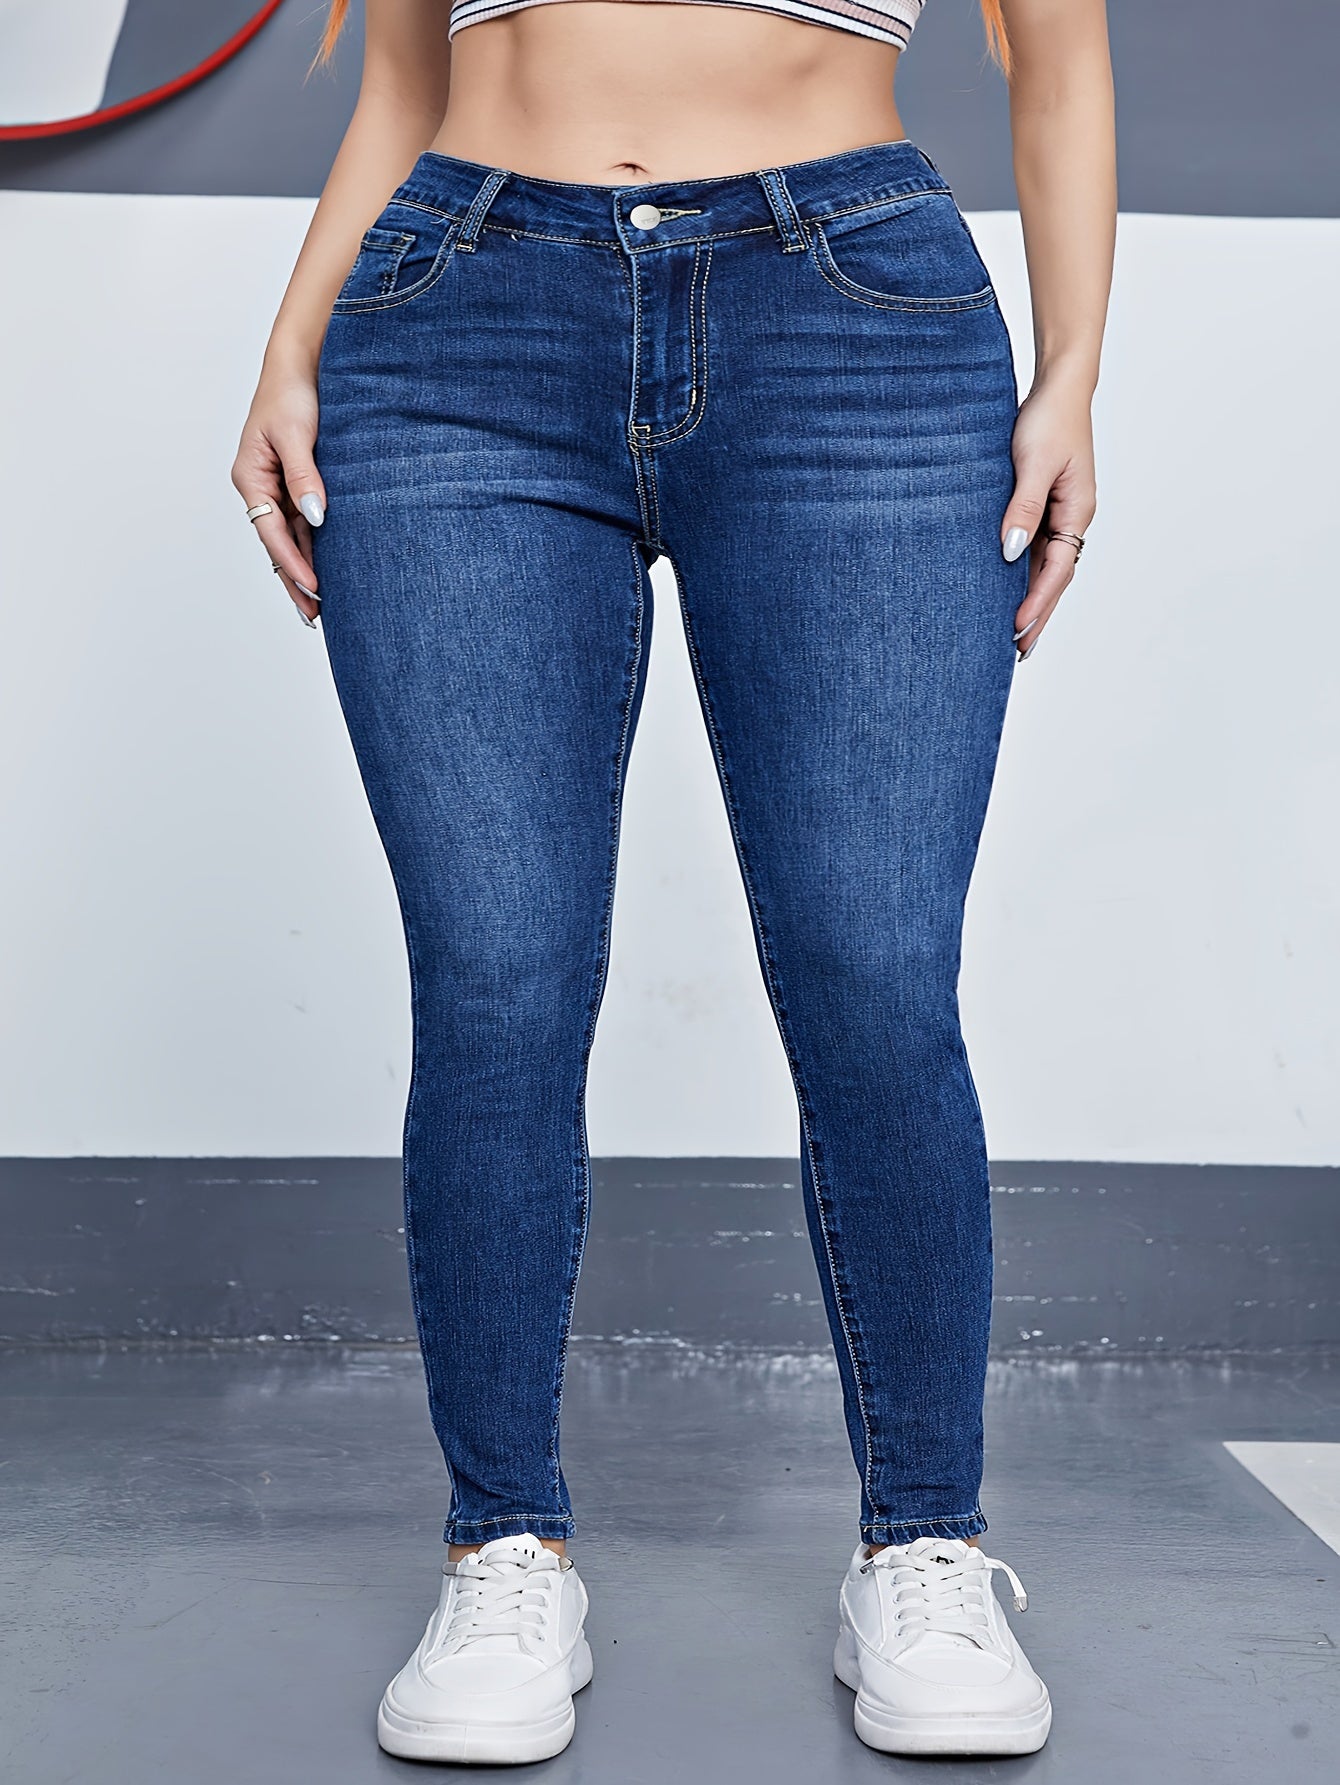 Get the Best of Both Worlds with Blue Leggings Jeans for Women - CasualFlowshop